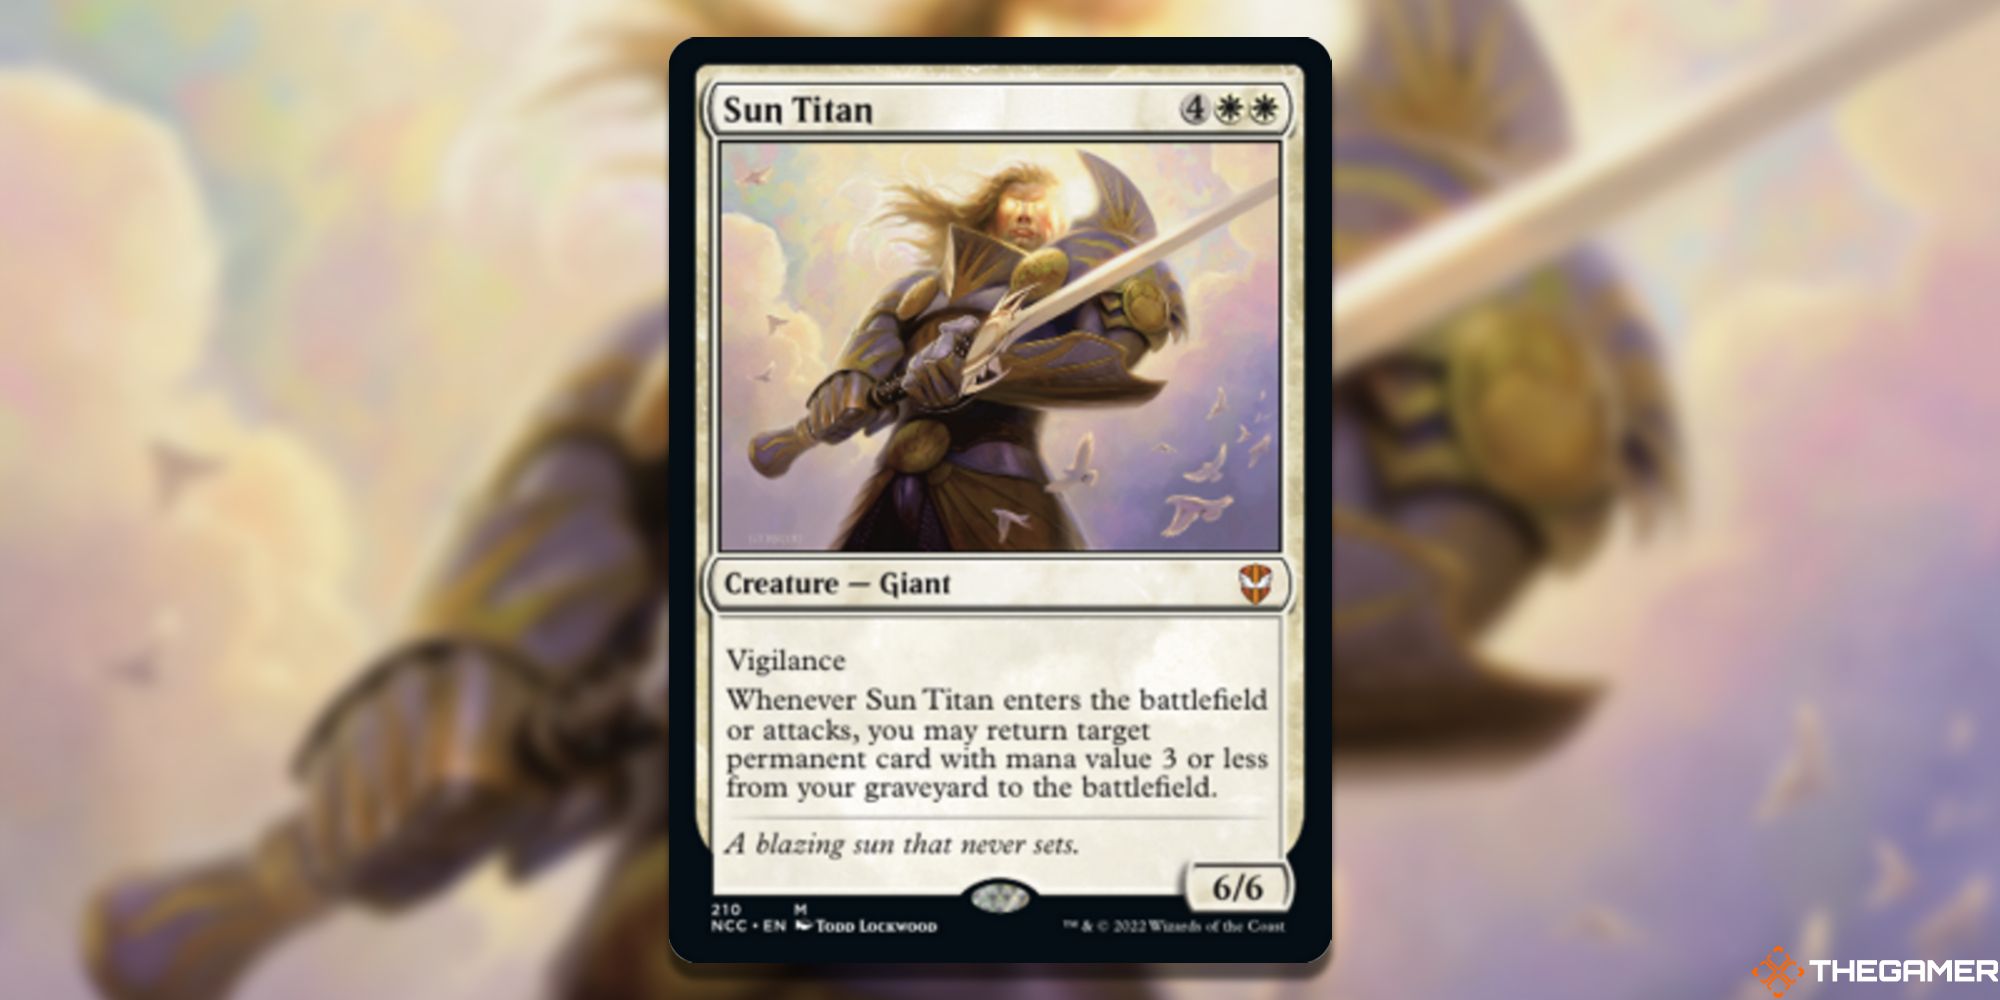 Image of the Sun Titan card in Magic: The Gathering, with art by Todd Lockwood